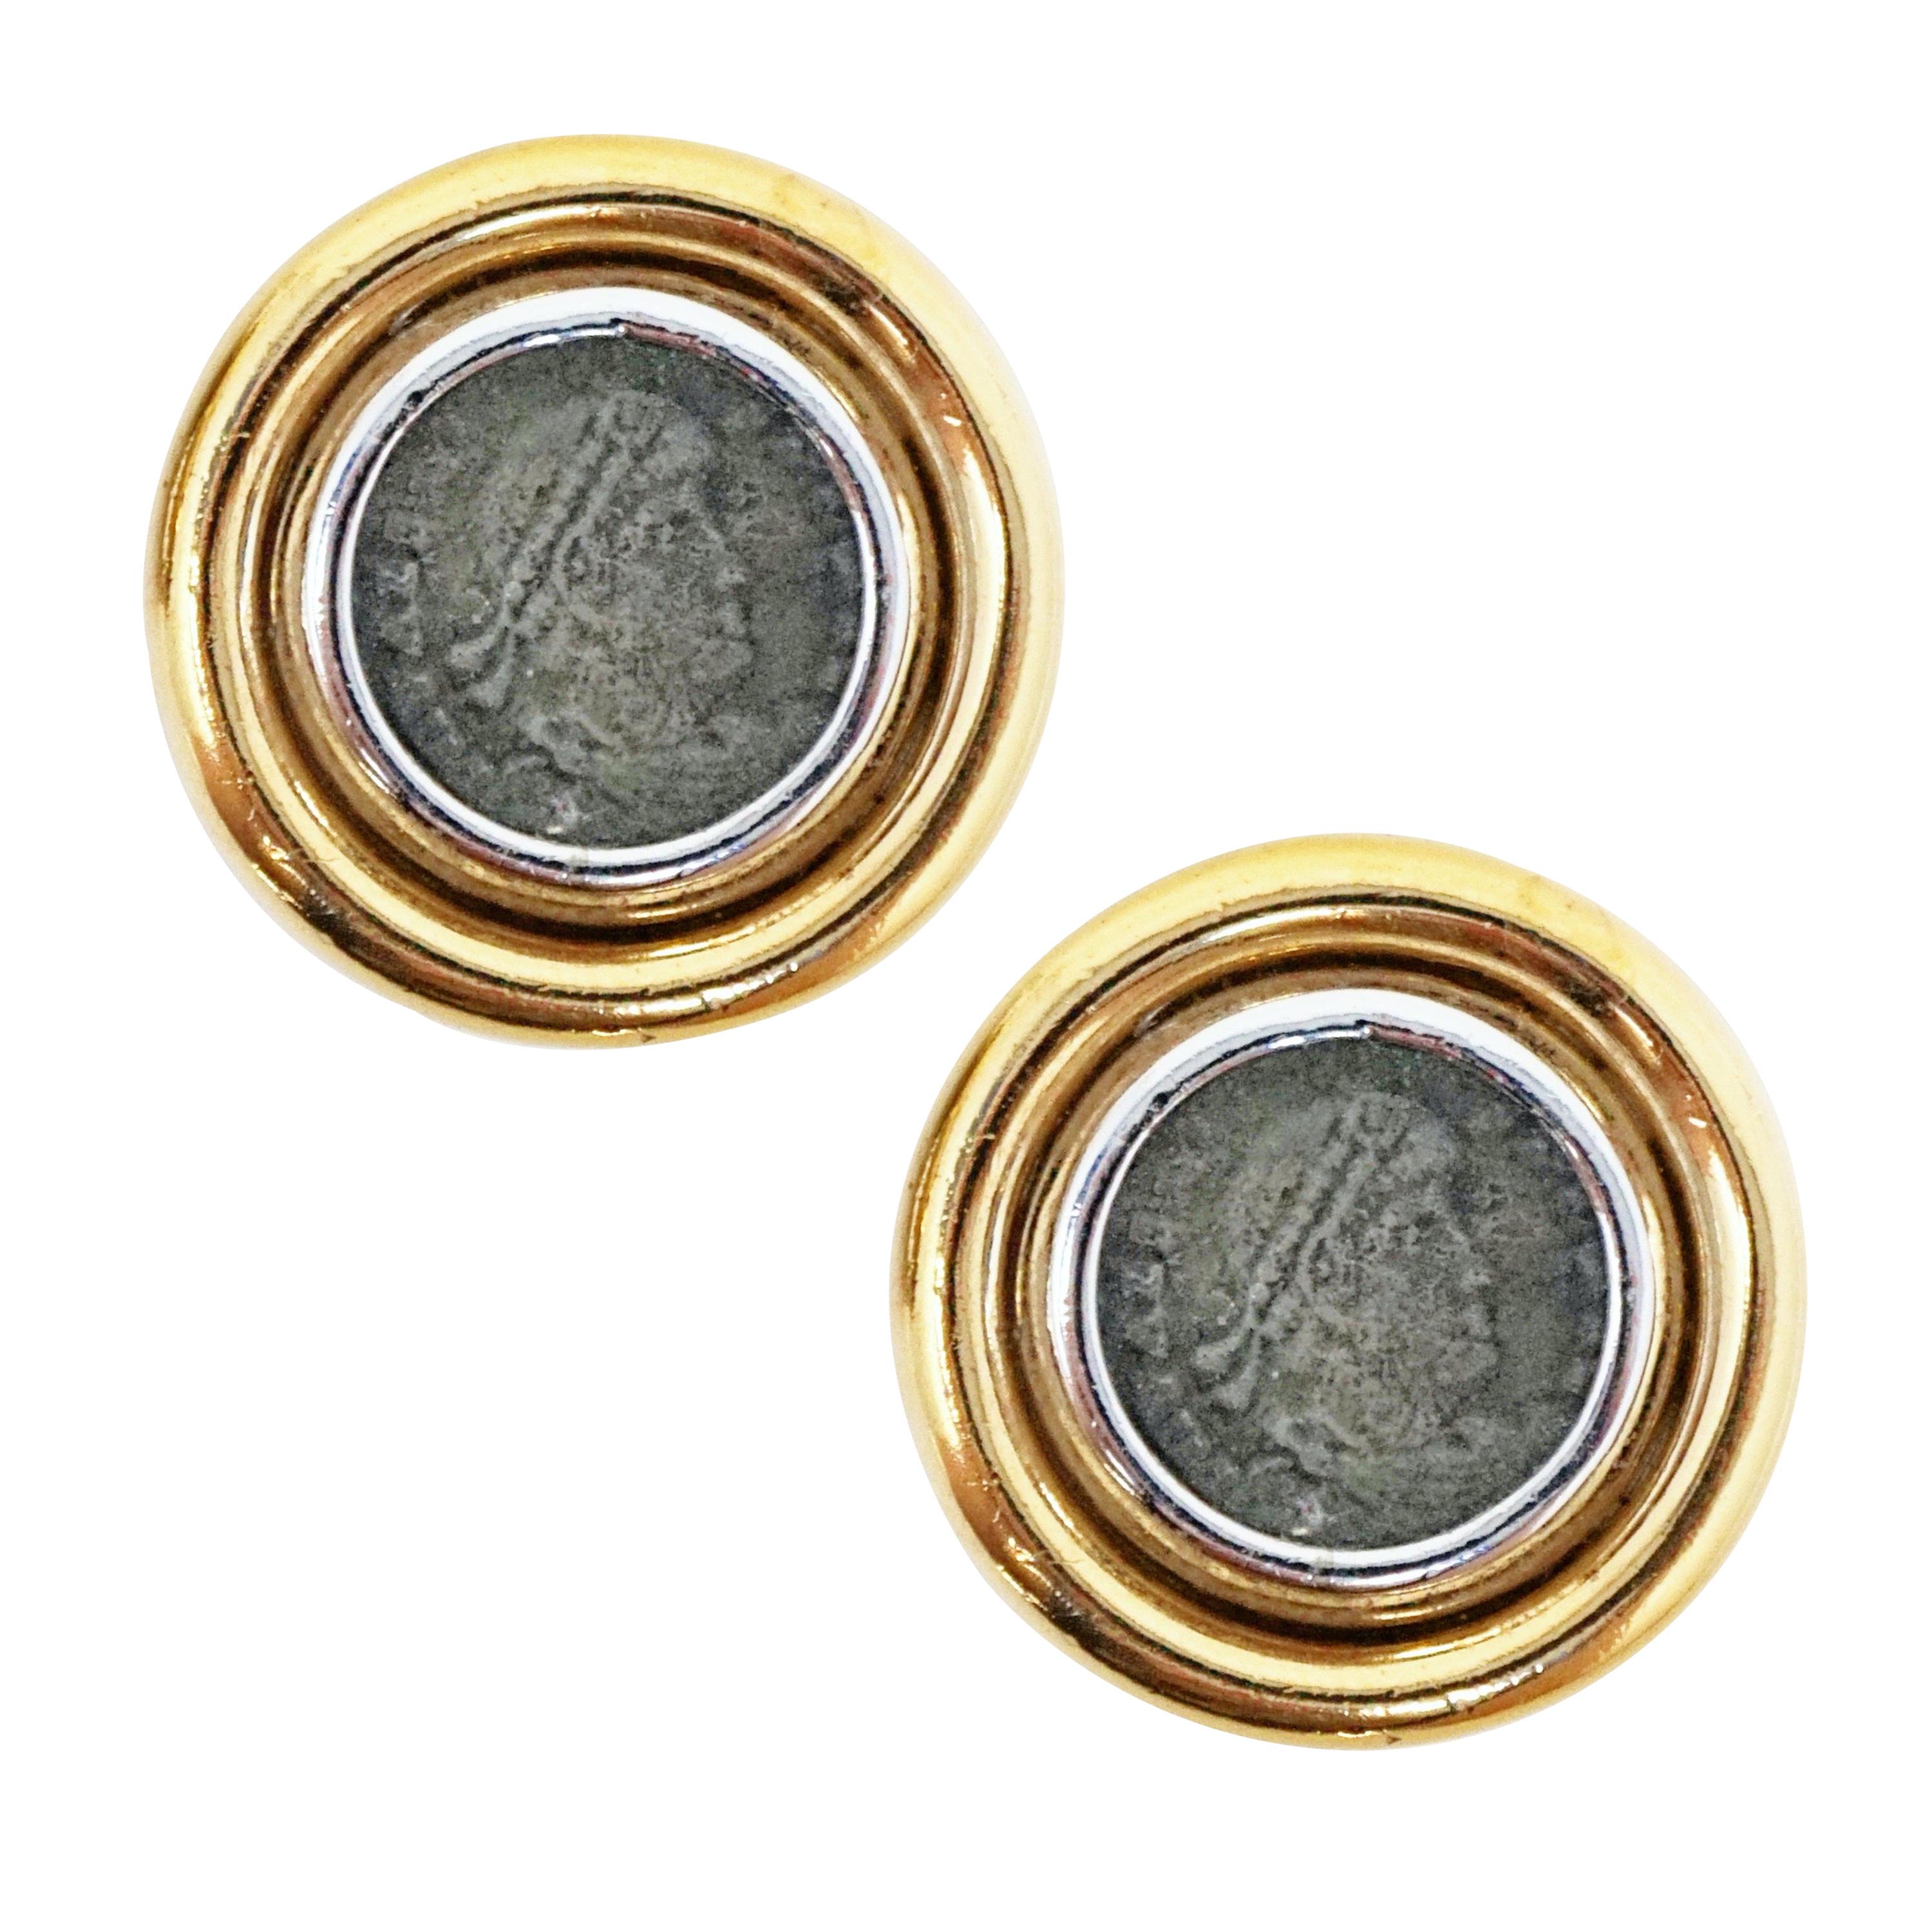 Vintage Roman Coin Gilt Button Earrings by Ciner